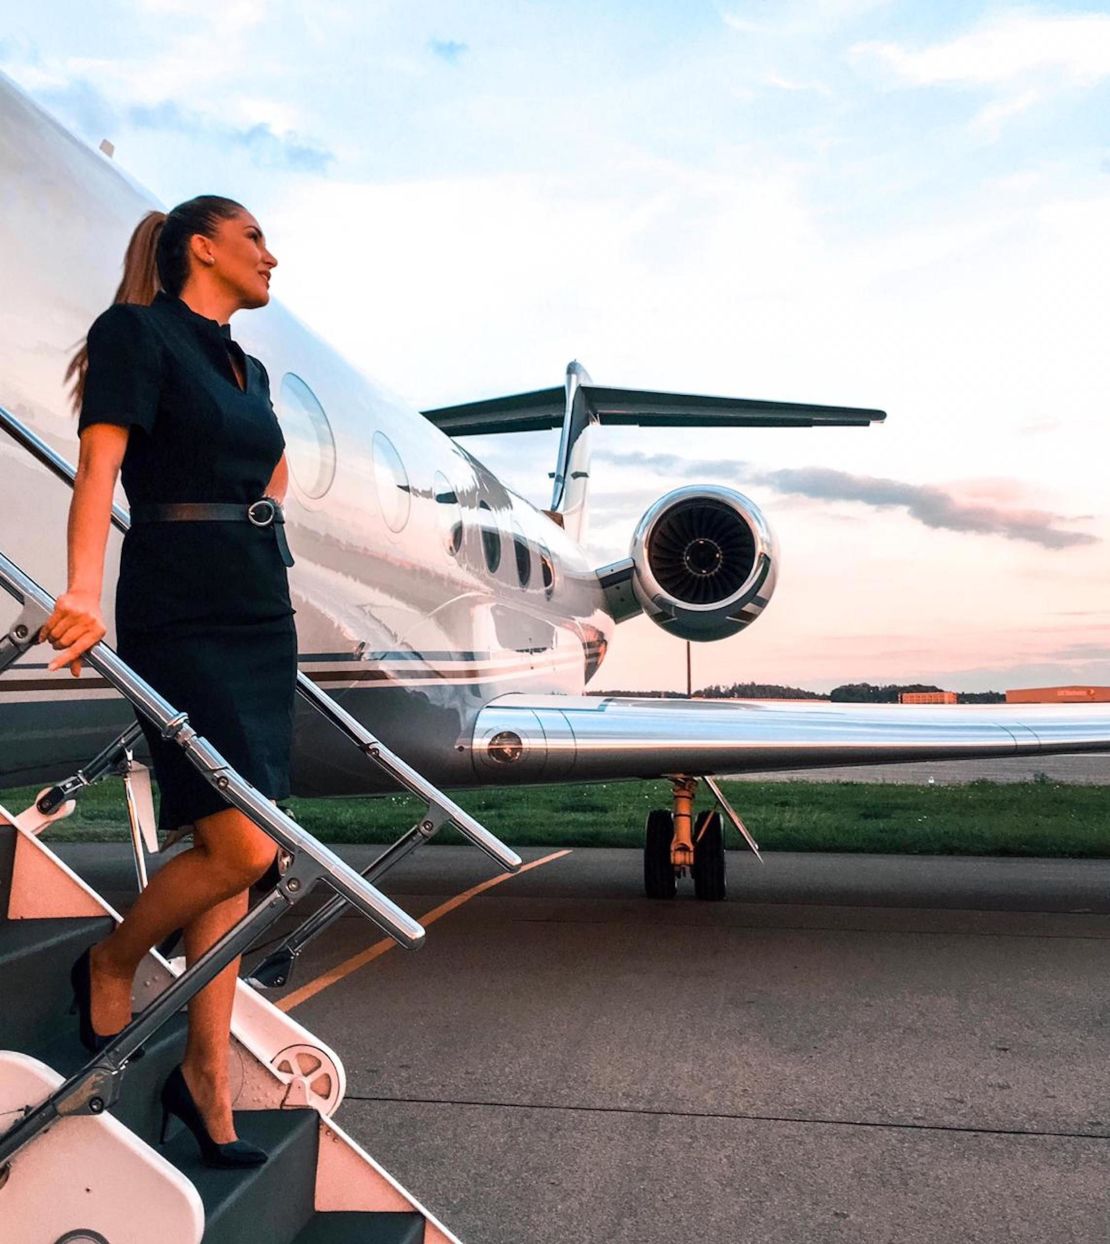 This high-flying handbag shaped like a jet costs more than an